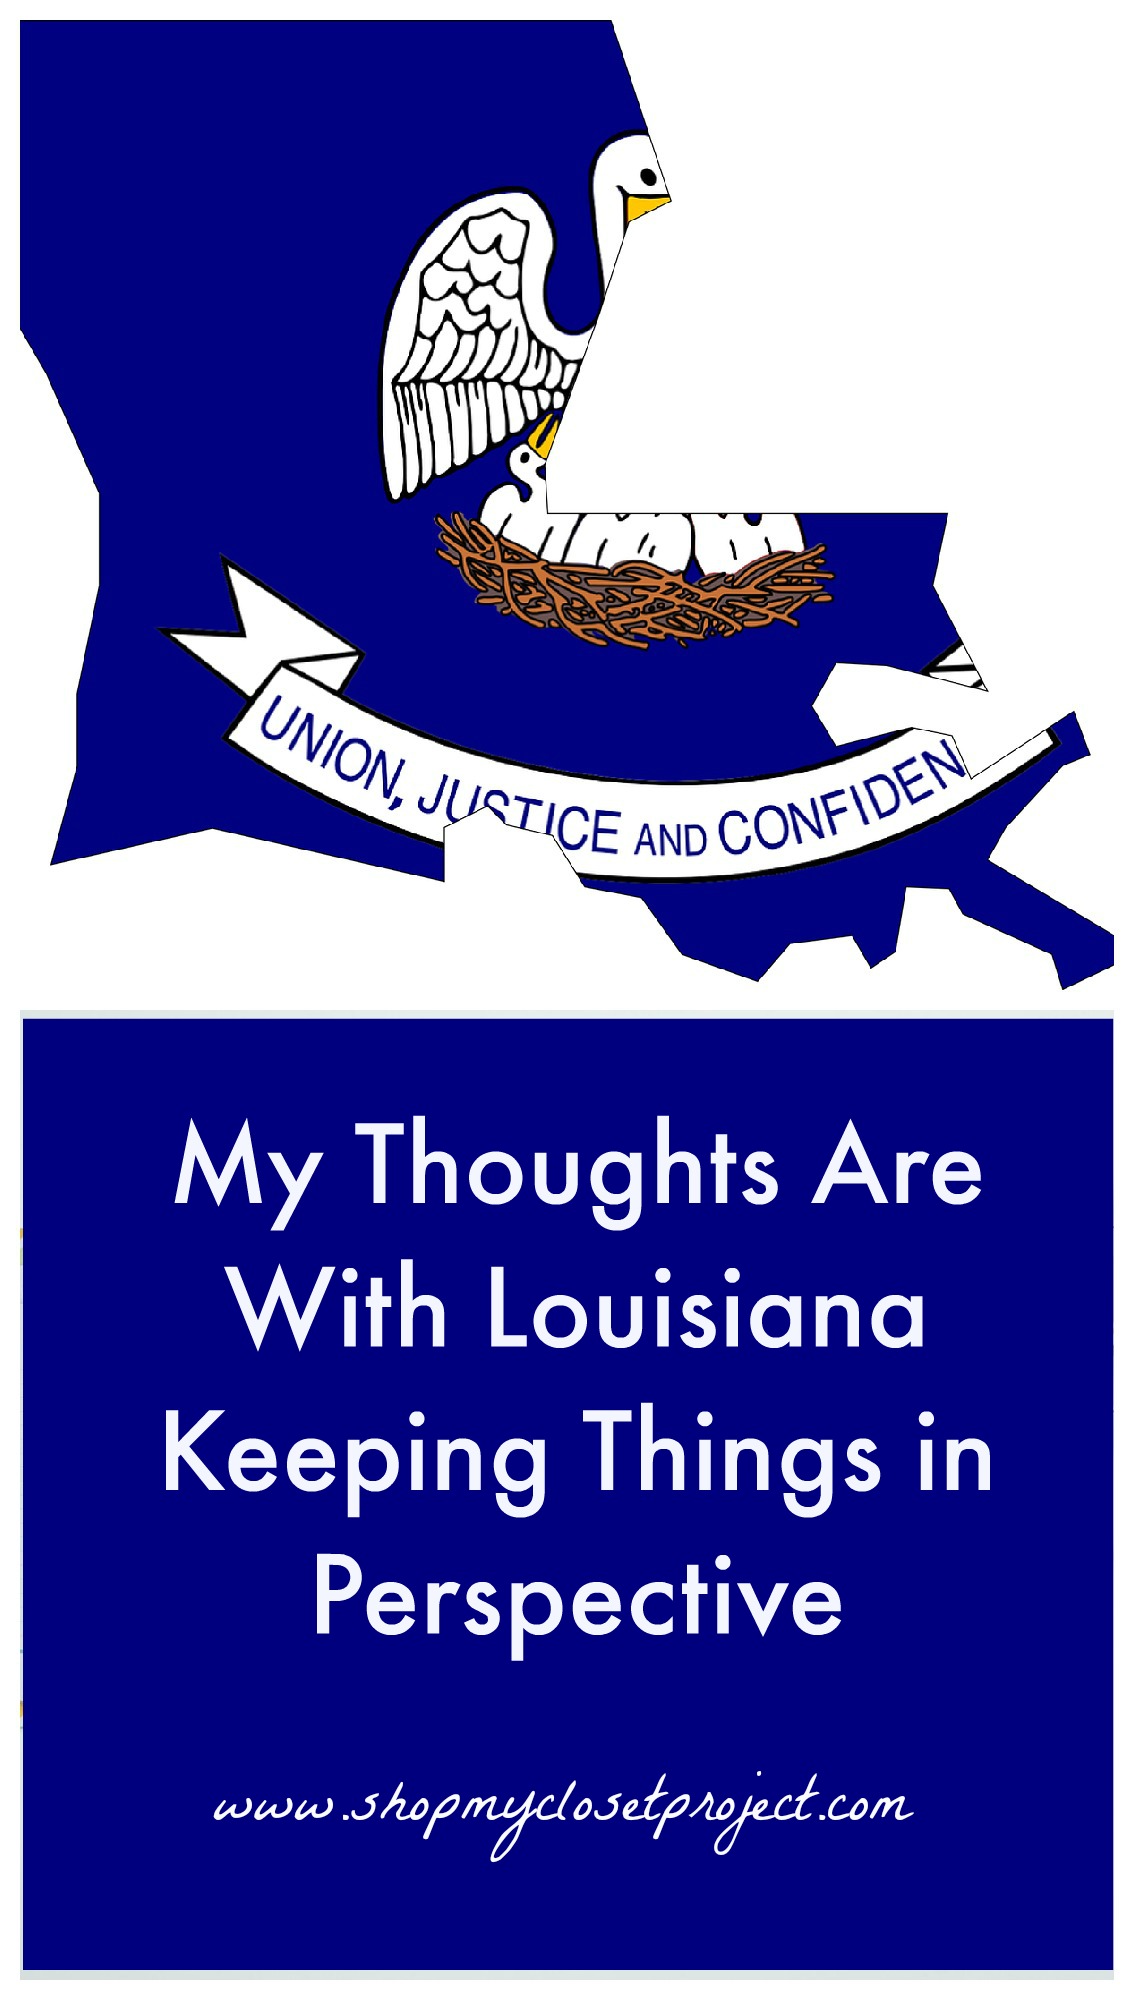 My Thoughts Are With Louisiana-Keeping Things in Perspective